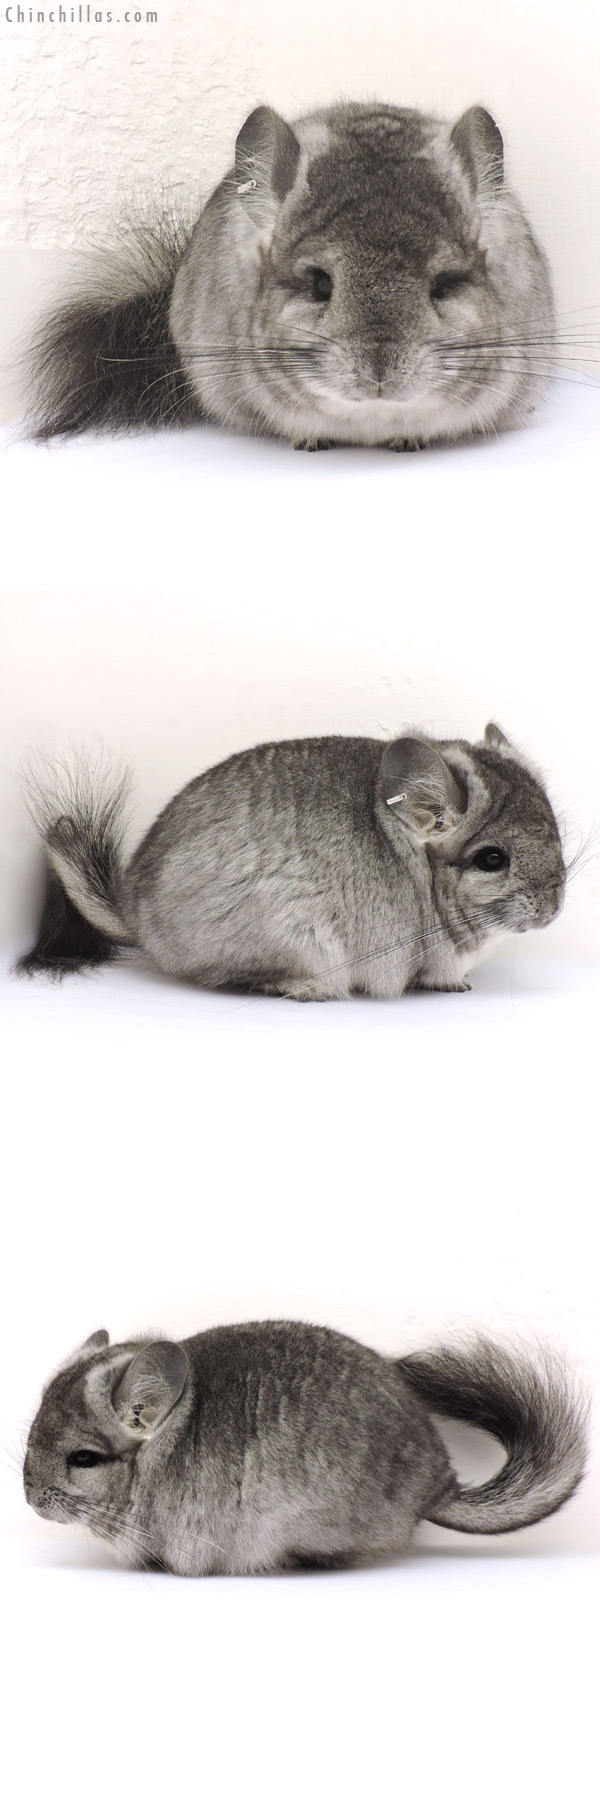 Chinchilla or related item offered for sale or export on Chinchillas.com - 14189 Standard Royal Persian Angora Female Chinchilla